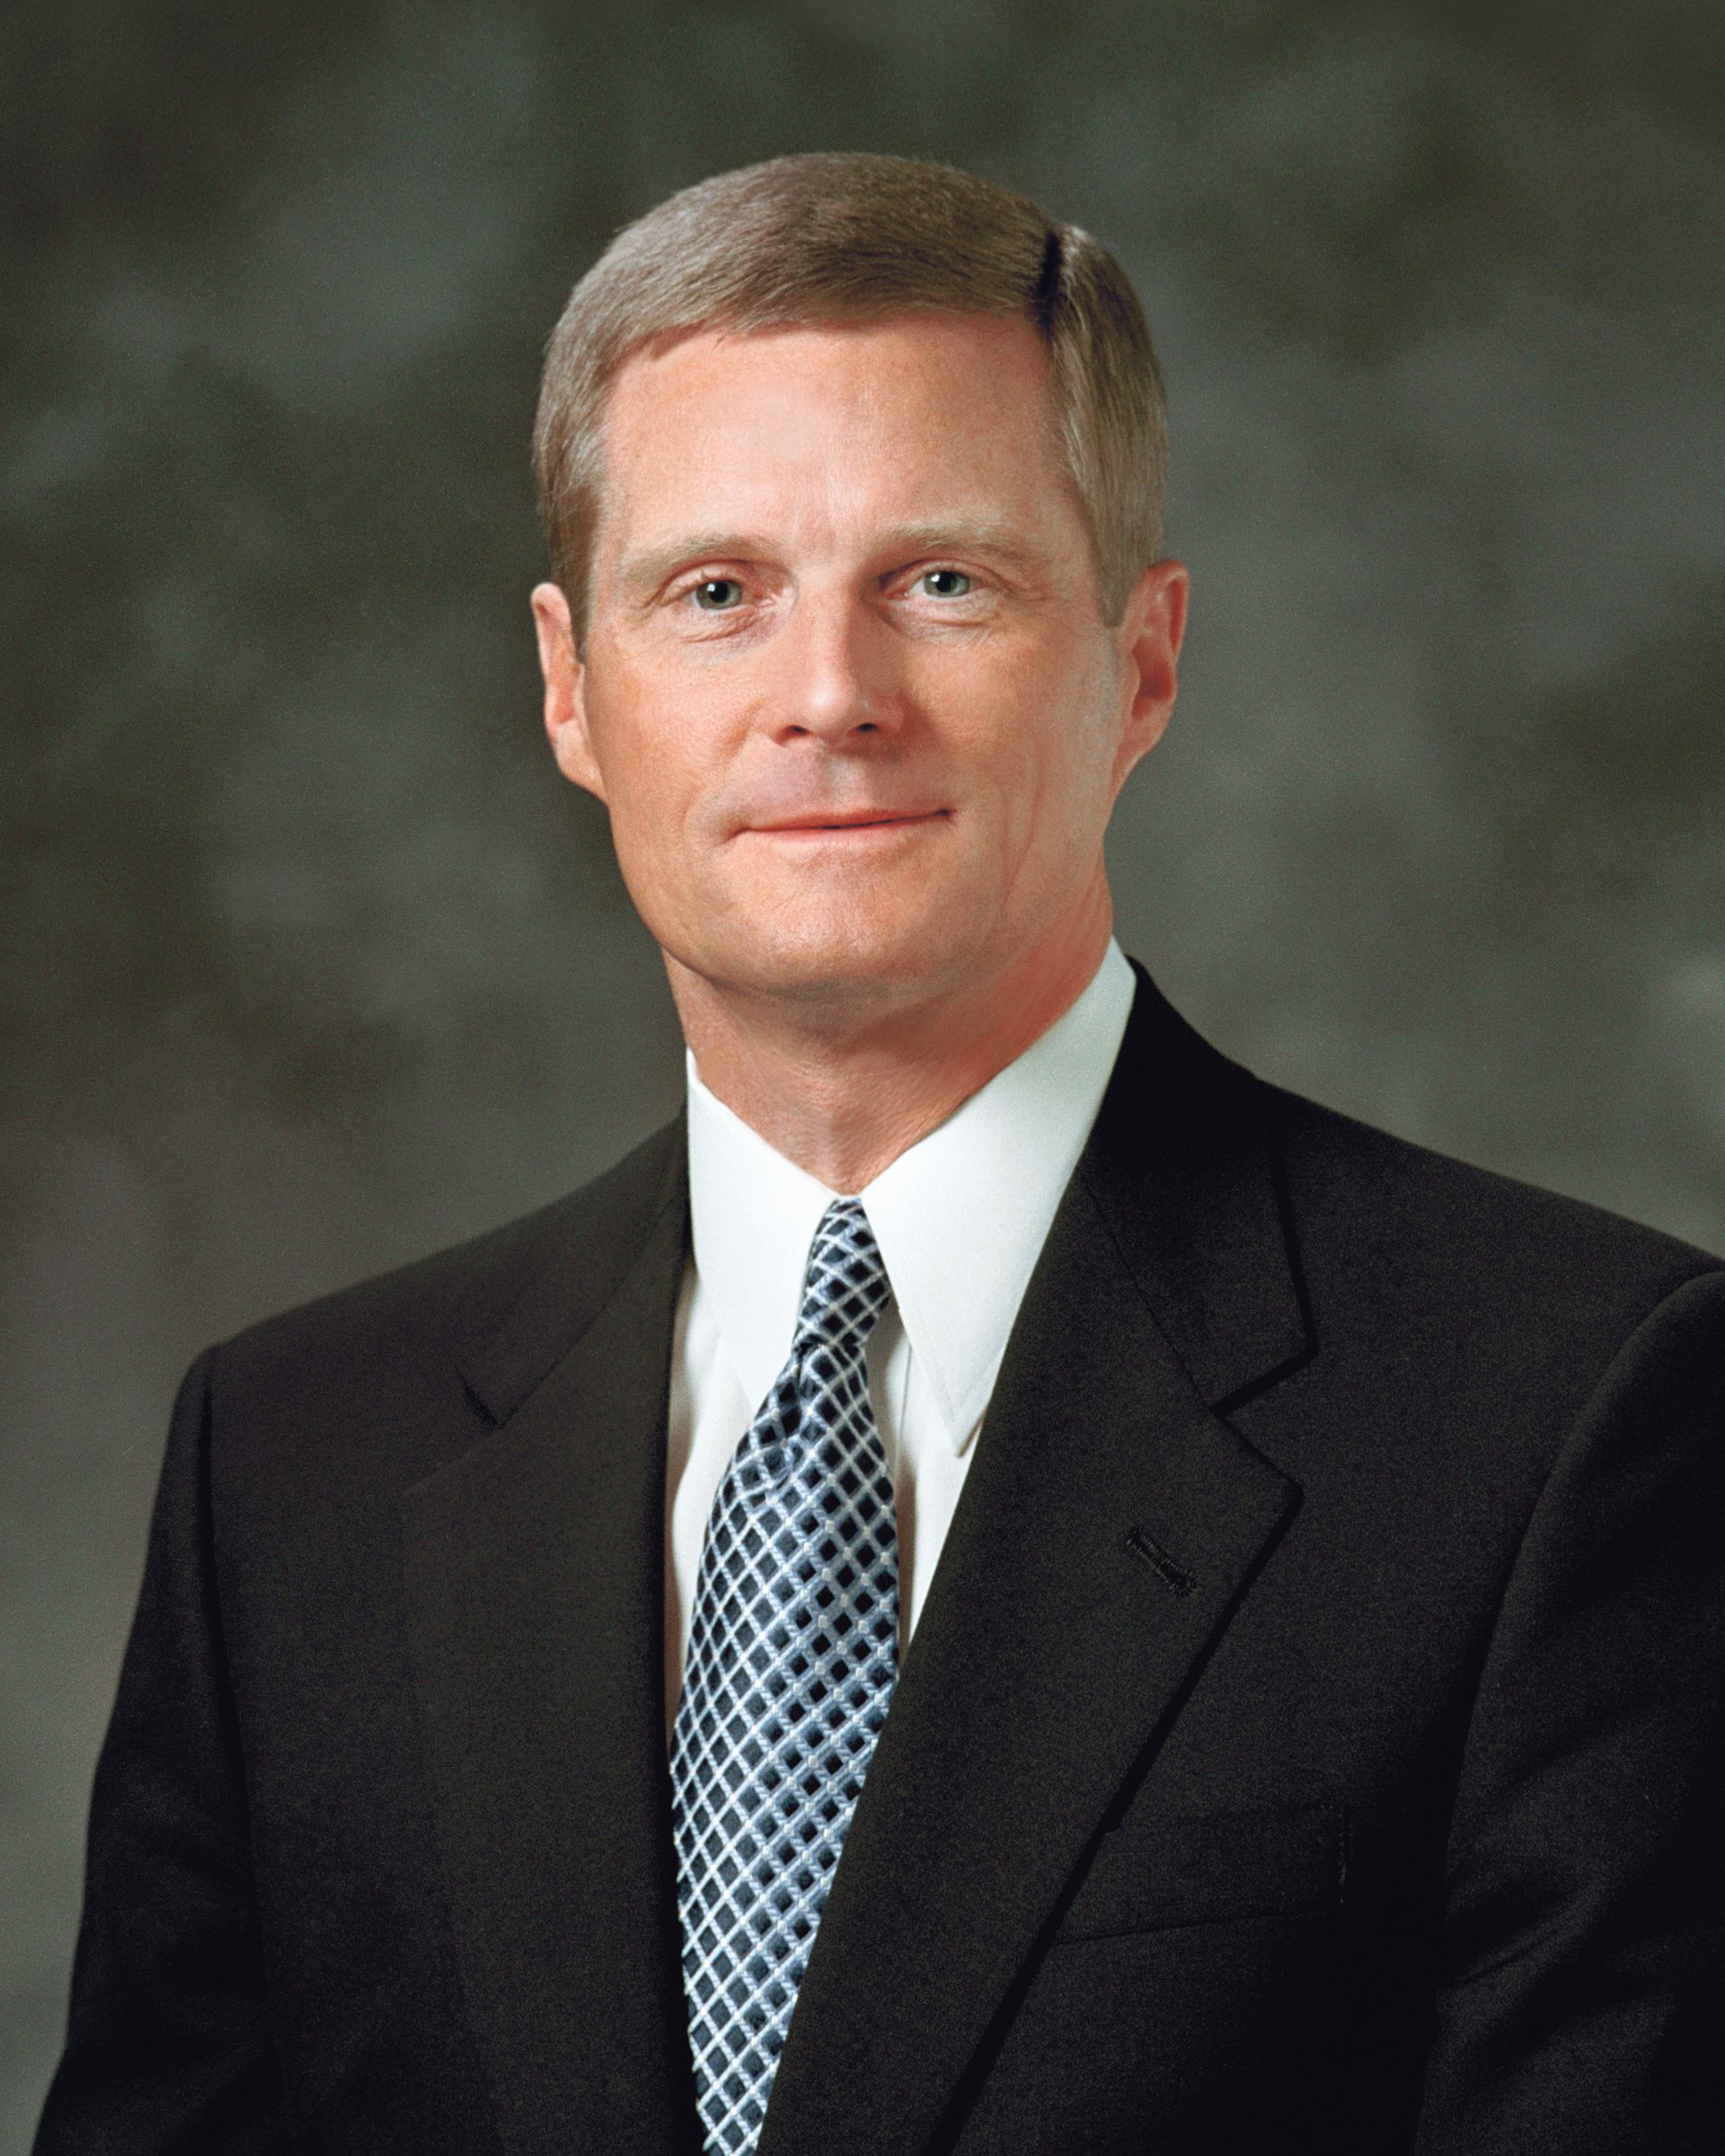 Former official portrait of David A. Bednar.  Replaced August 2020.